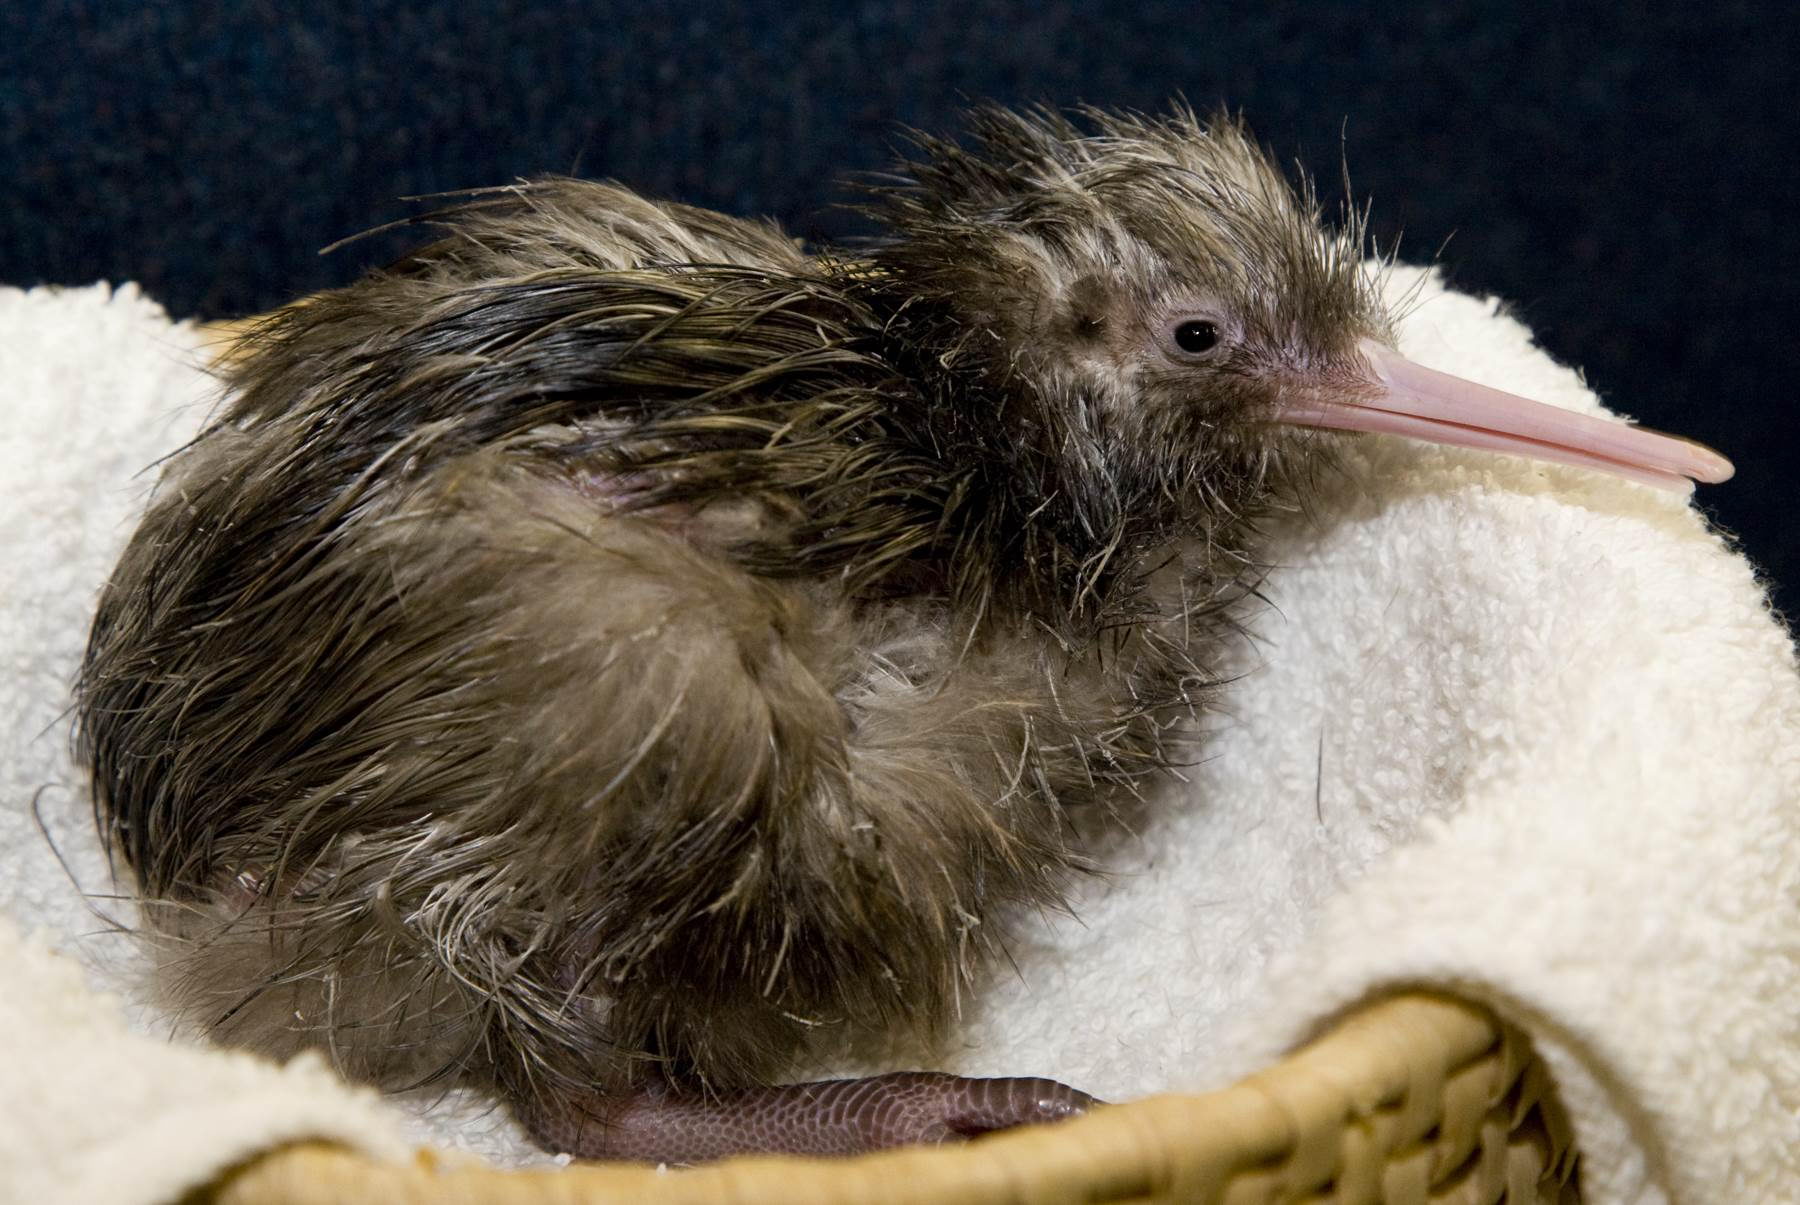 kiwi bird facts - The Zoo's brown kiwi chick hatched